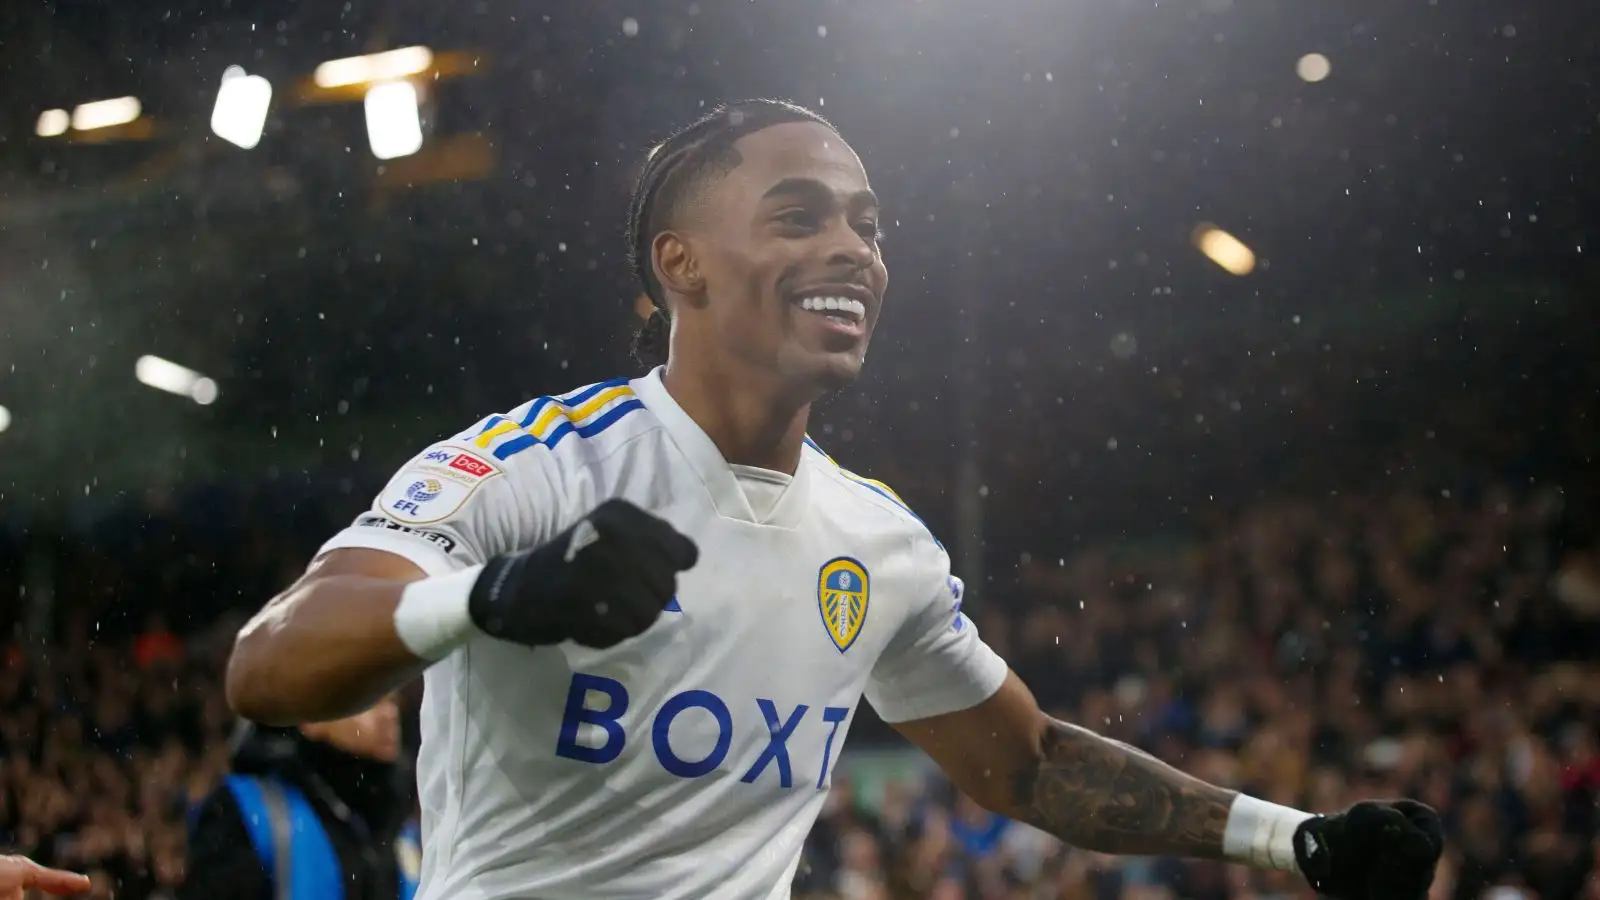 Crysencio Summerville of Leeds United celebrates his goal during the Sky Bet Championship match between Leeds United and Rotherham United